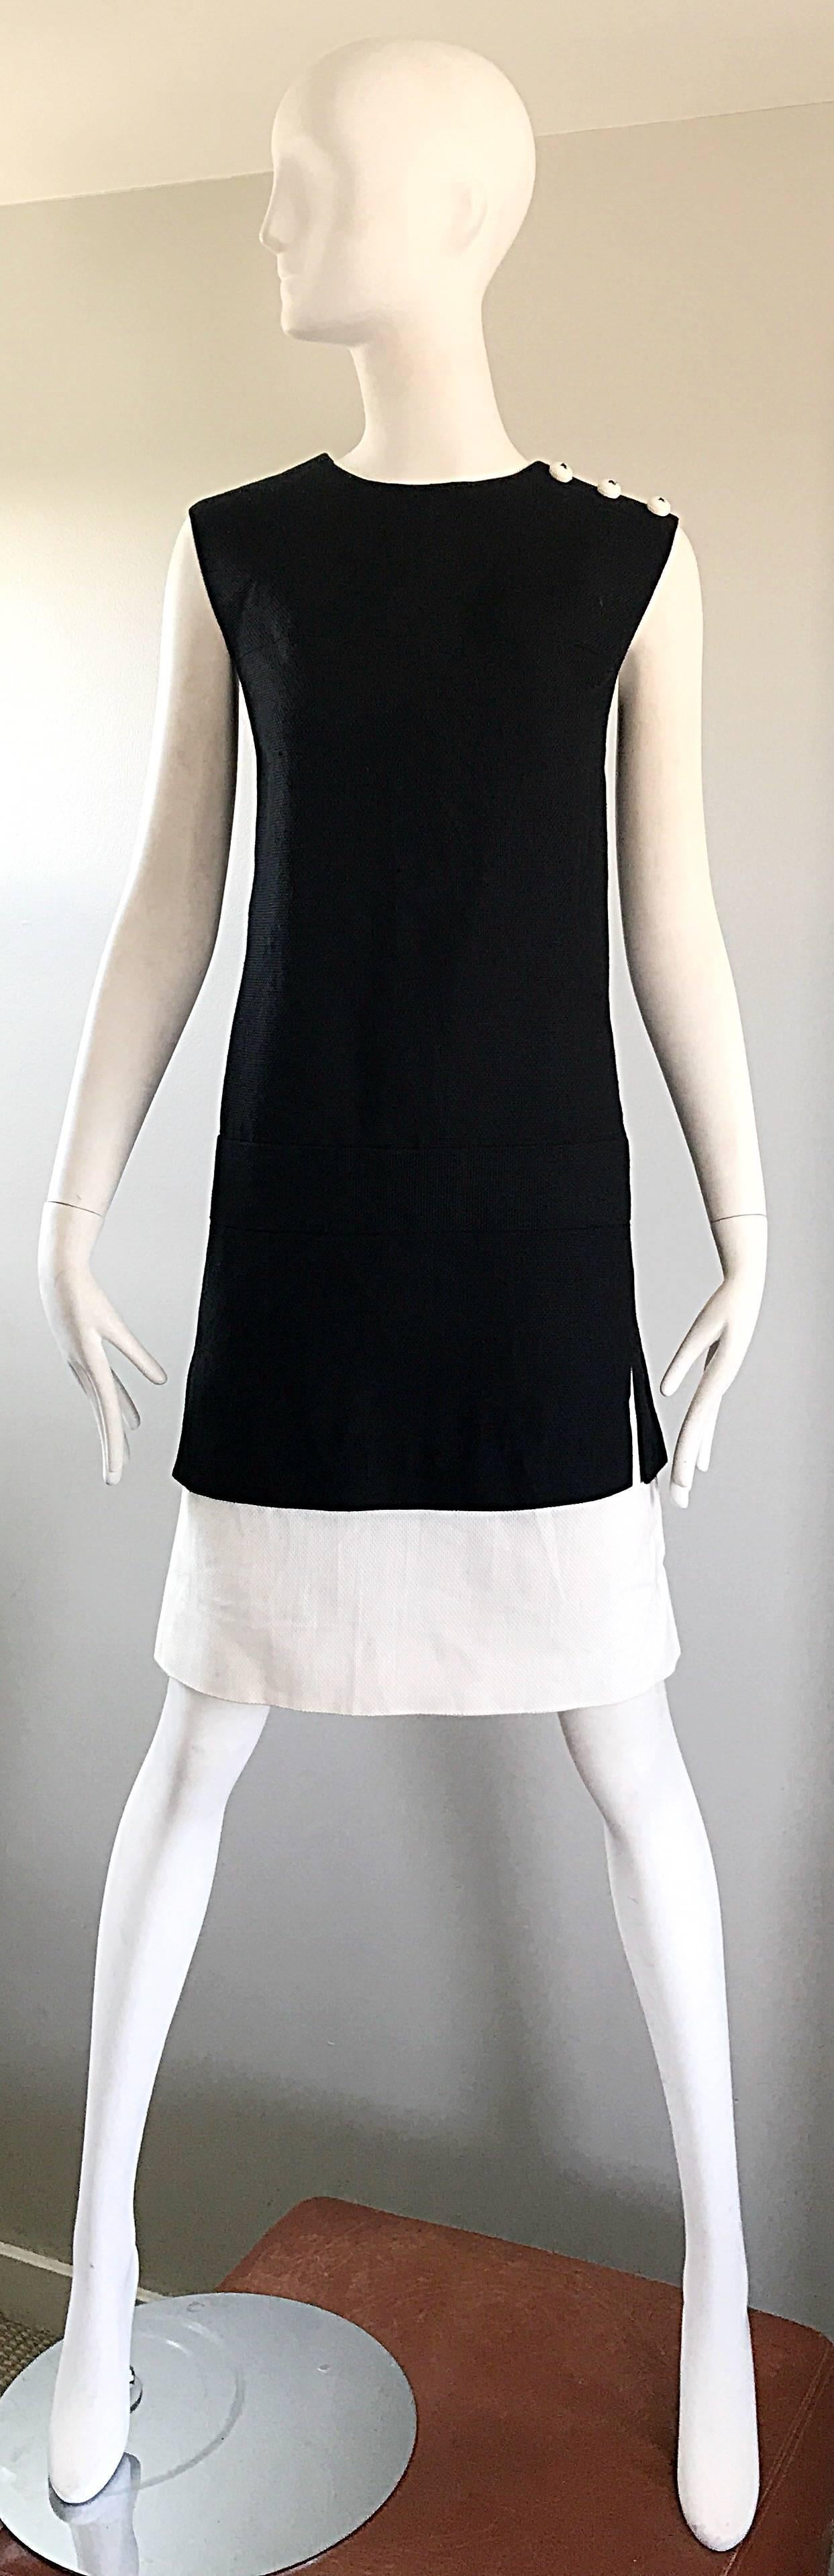 Chic 1960s HOWARD WOLF black and white cotton and linen blend shift dress! Classic shift shape, with just the right amount of added flair! Three white mock round buttons at the left shoulder. White panels under the skirt peek through the slits at